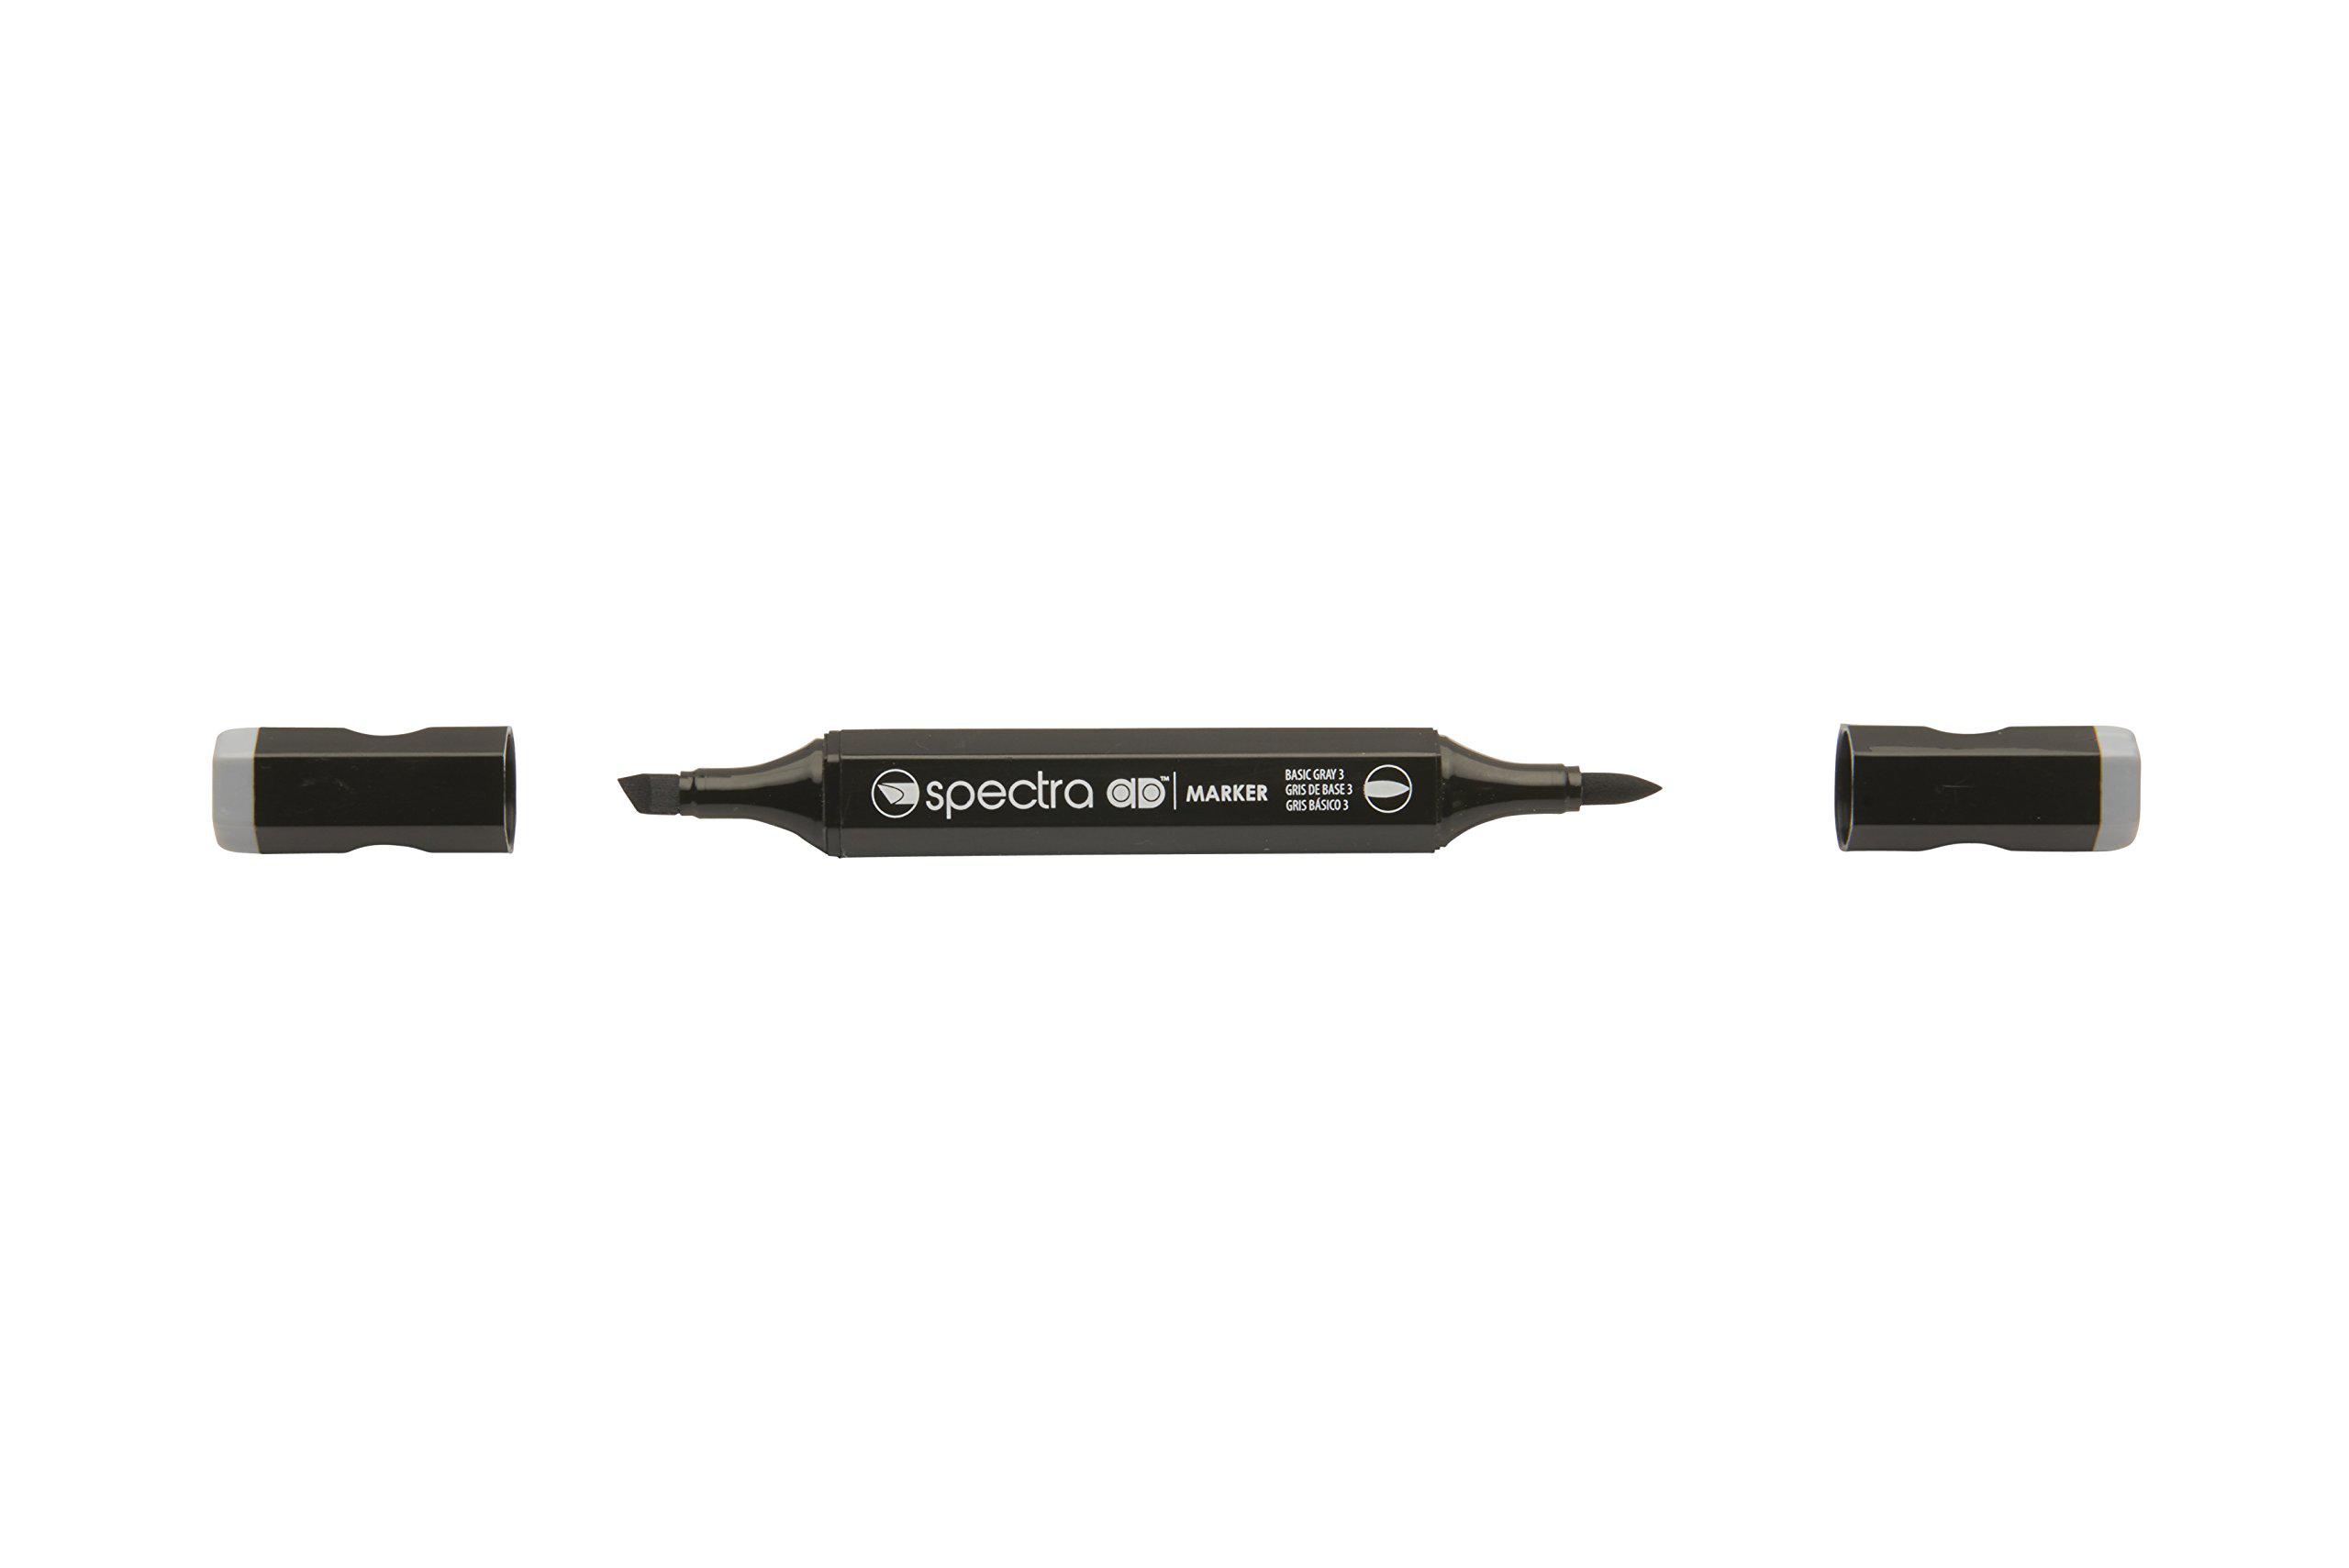 ad marker chartpak spectra, tri-nib and brush dual-tip, basic gray 3, 1 each (s021ad)